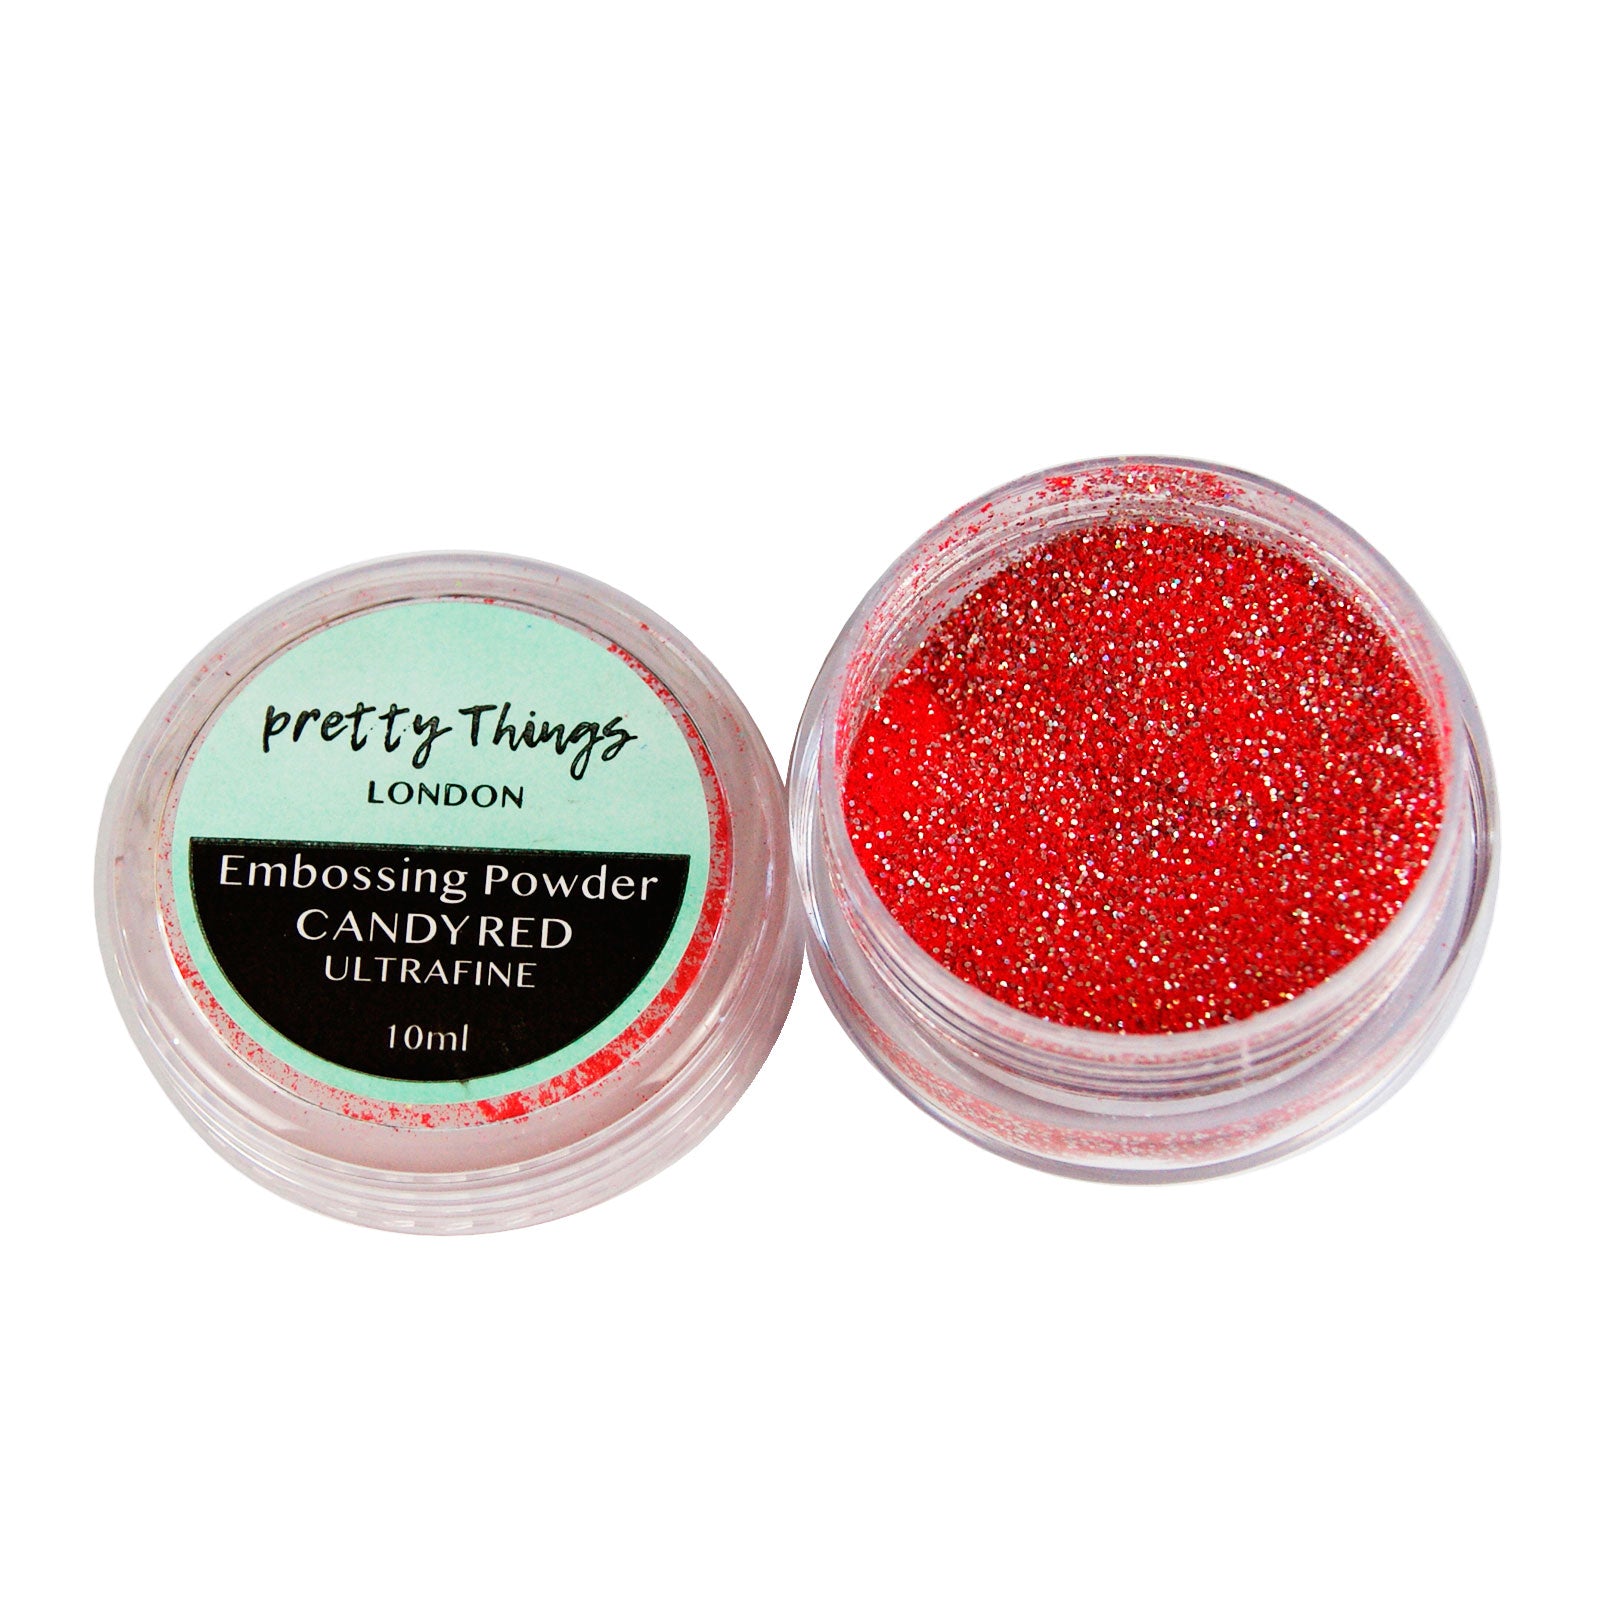 Candy Red glitter embossing powder